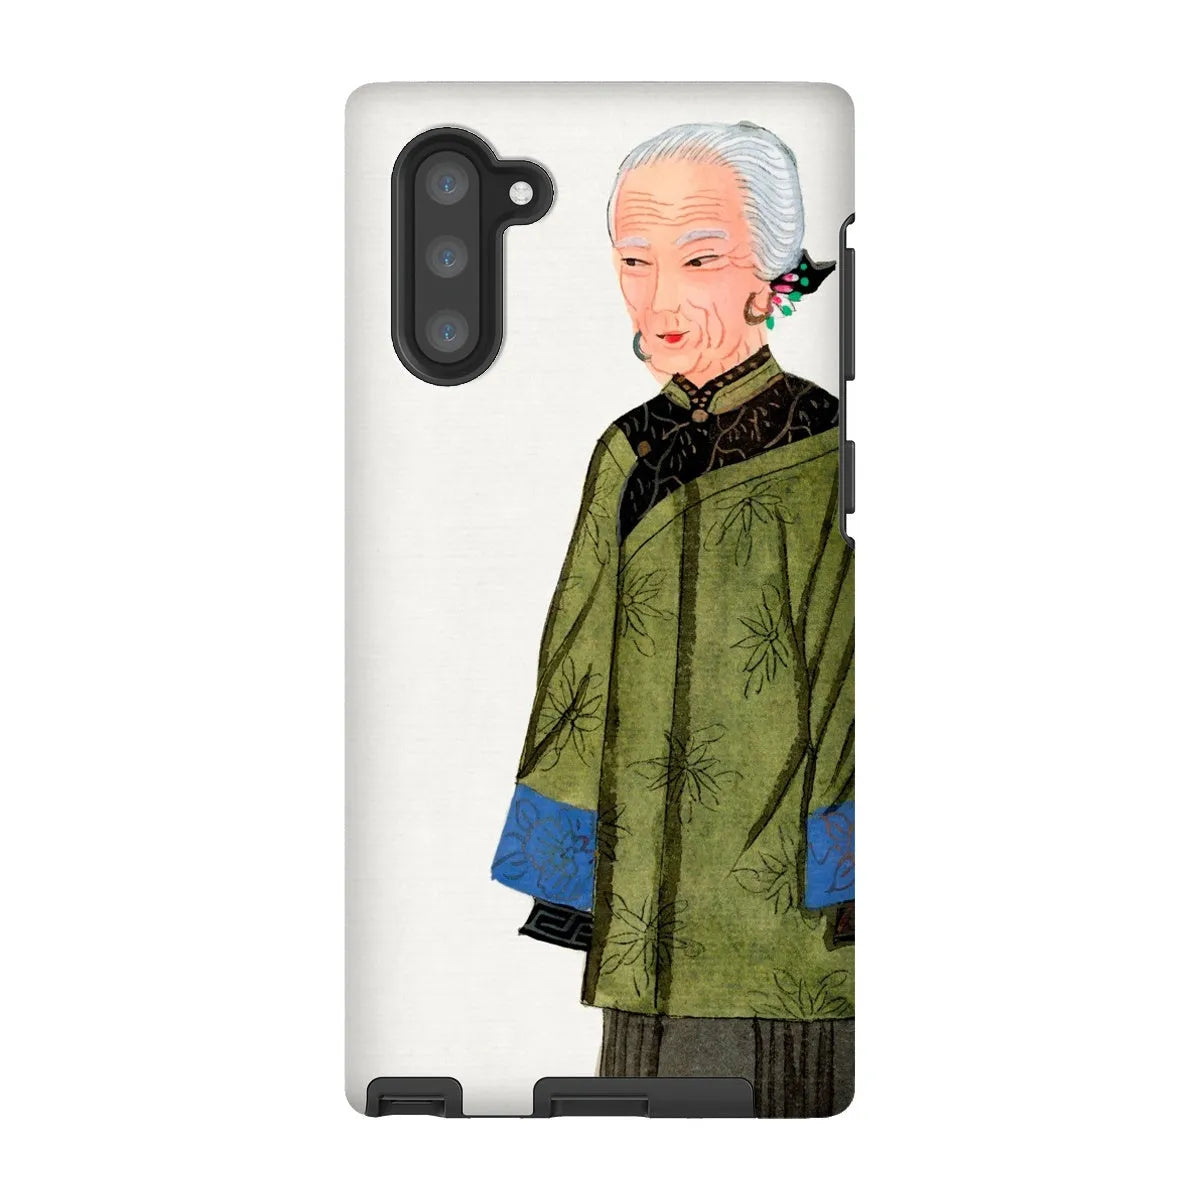 Grand Dame - Qing Chinese Aesthetic Art Phone Case - Samsung Galaxy Note 10 / Matte - Mobile Phone Cases - Aesthetic Art